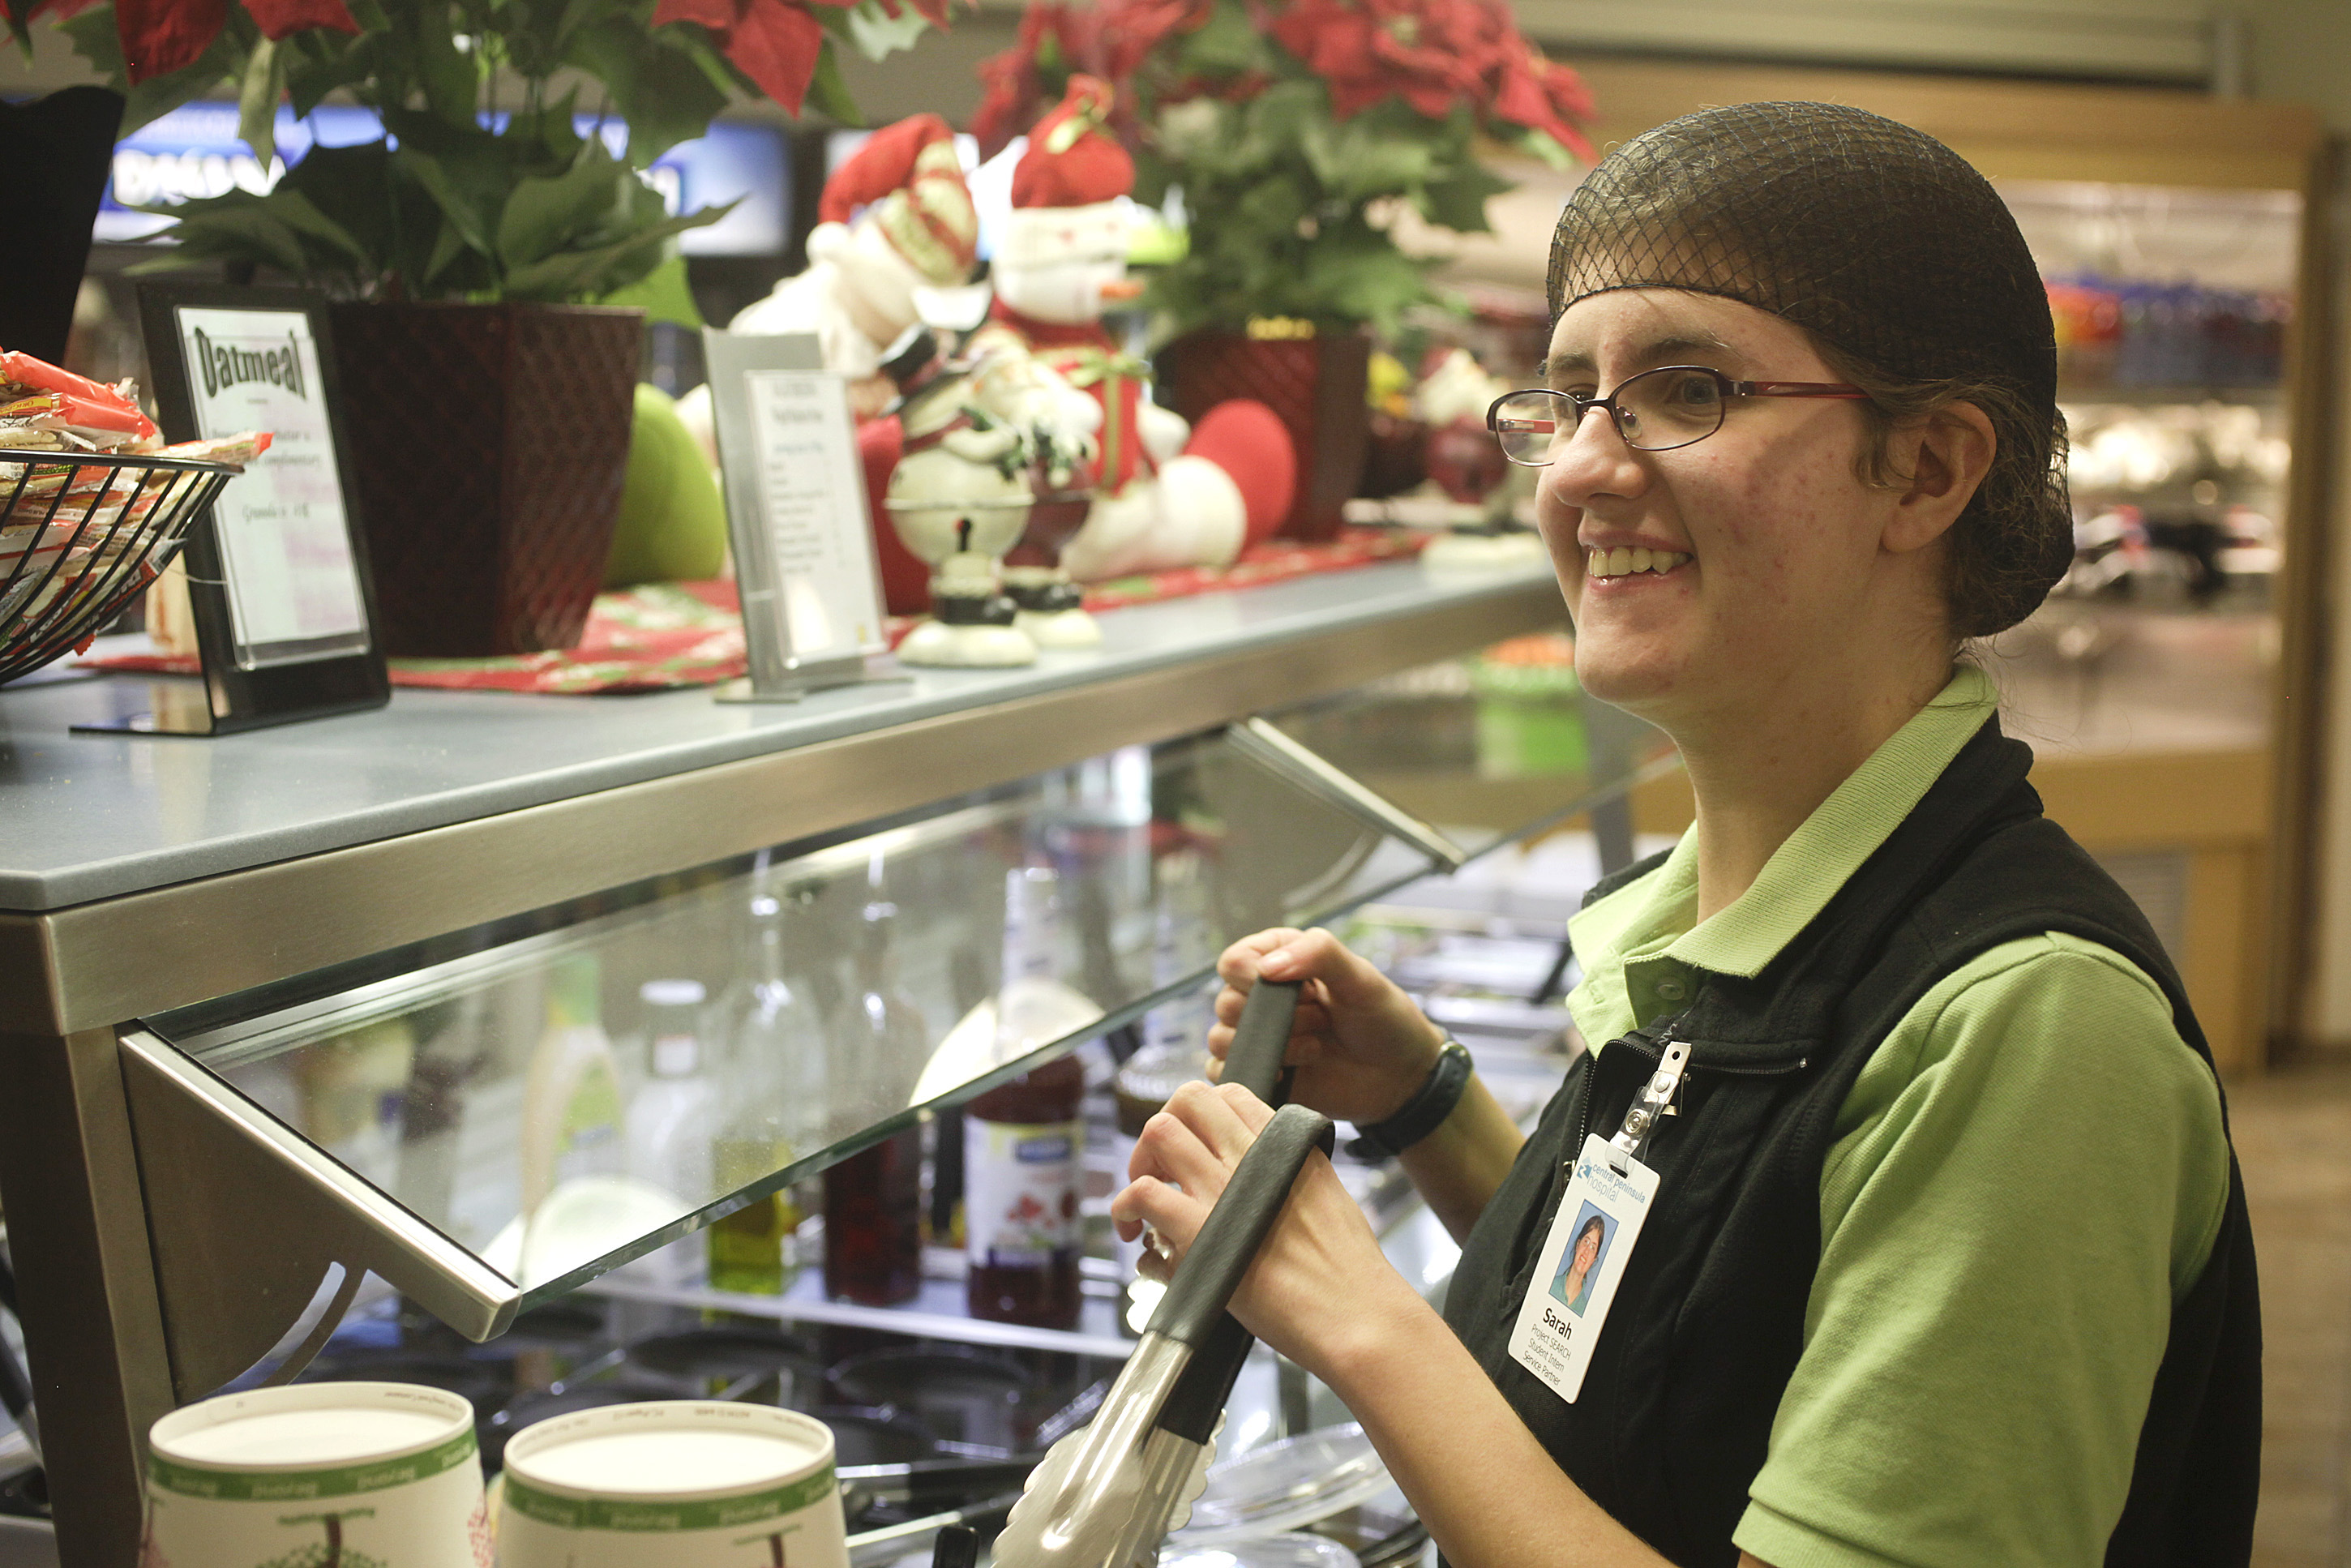 Sarah Mohorcich laughs and sings along with Christmas music as she stocks a salad bar in the cafeteria at Central Peninsula Hospital last week. Mohorcich is an intern with Project SEARCH which provides job training for students with disabilities. -Photo by Rashah McChesney, Morris News Service - Alaska